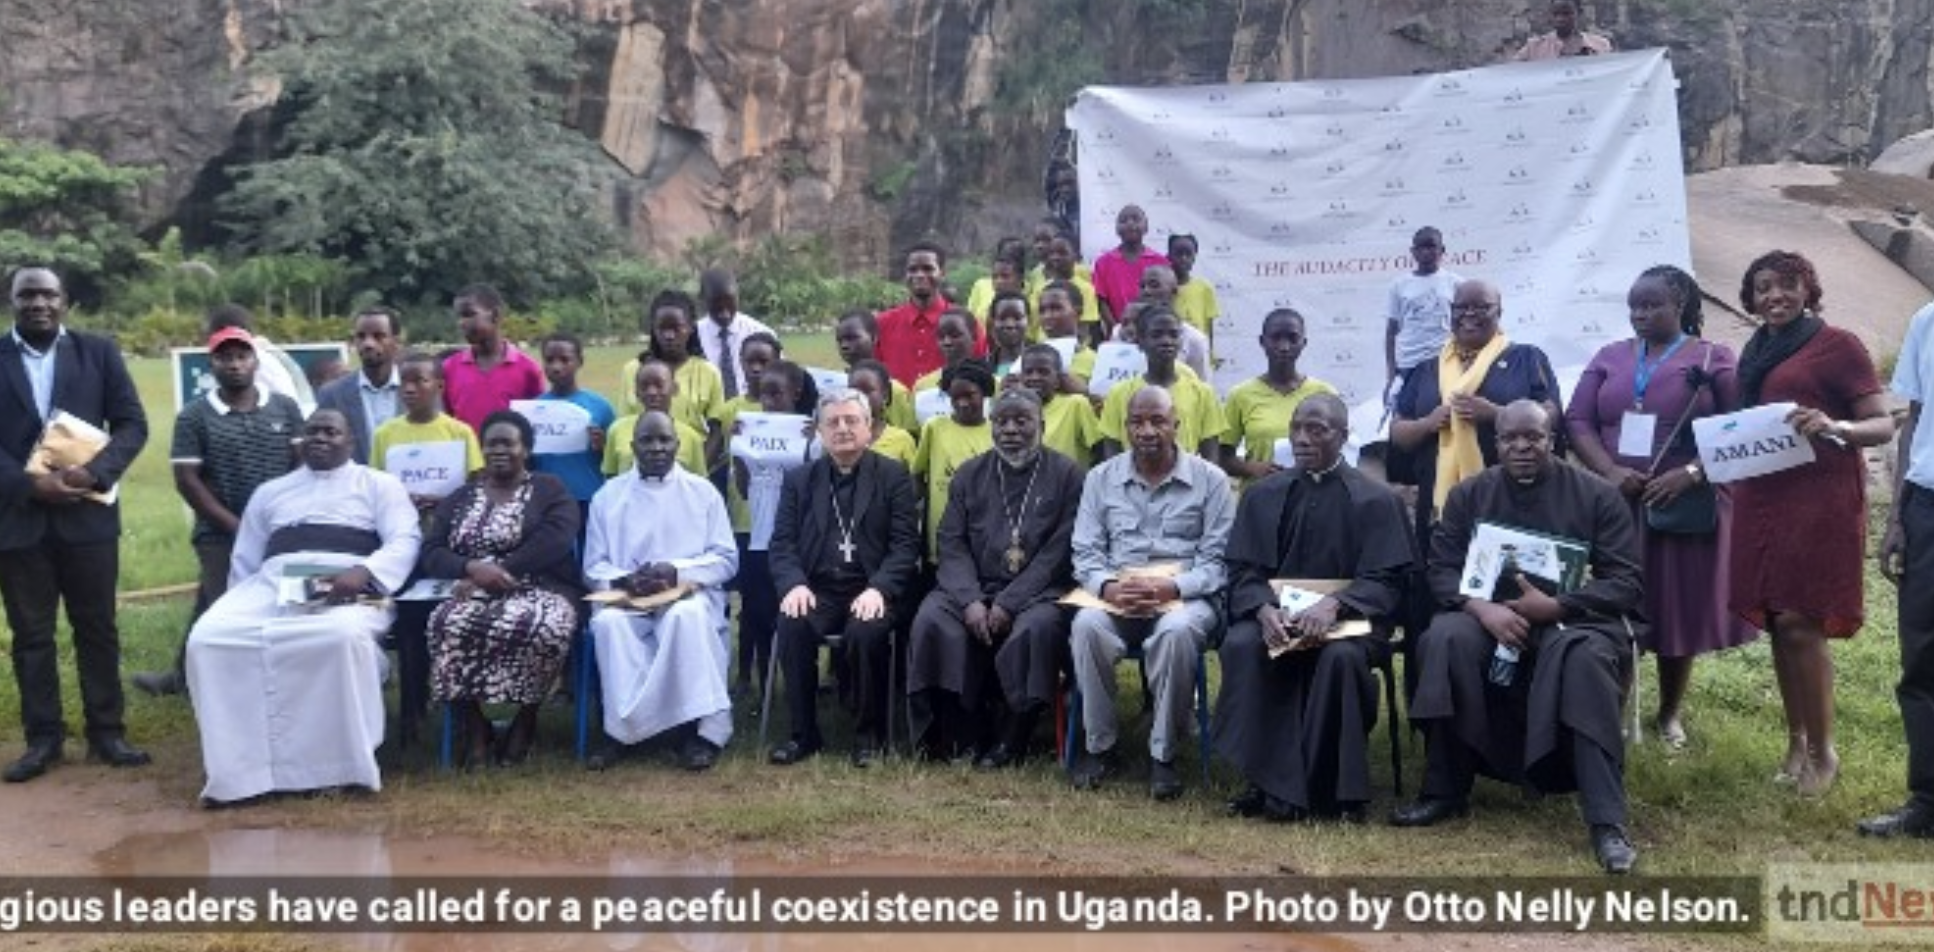 Religious leaders commit to peaceful coexistence as Pope Francis delivers message of peace